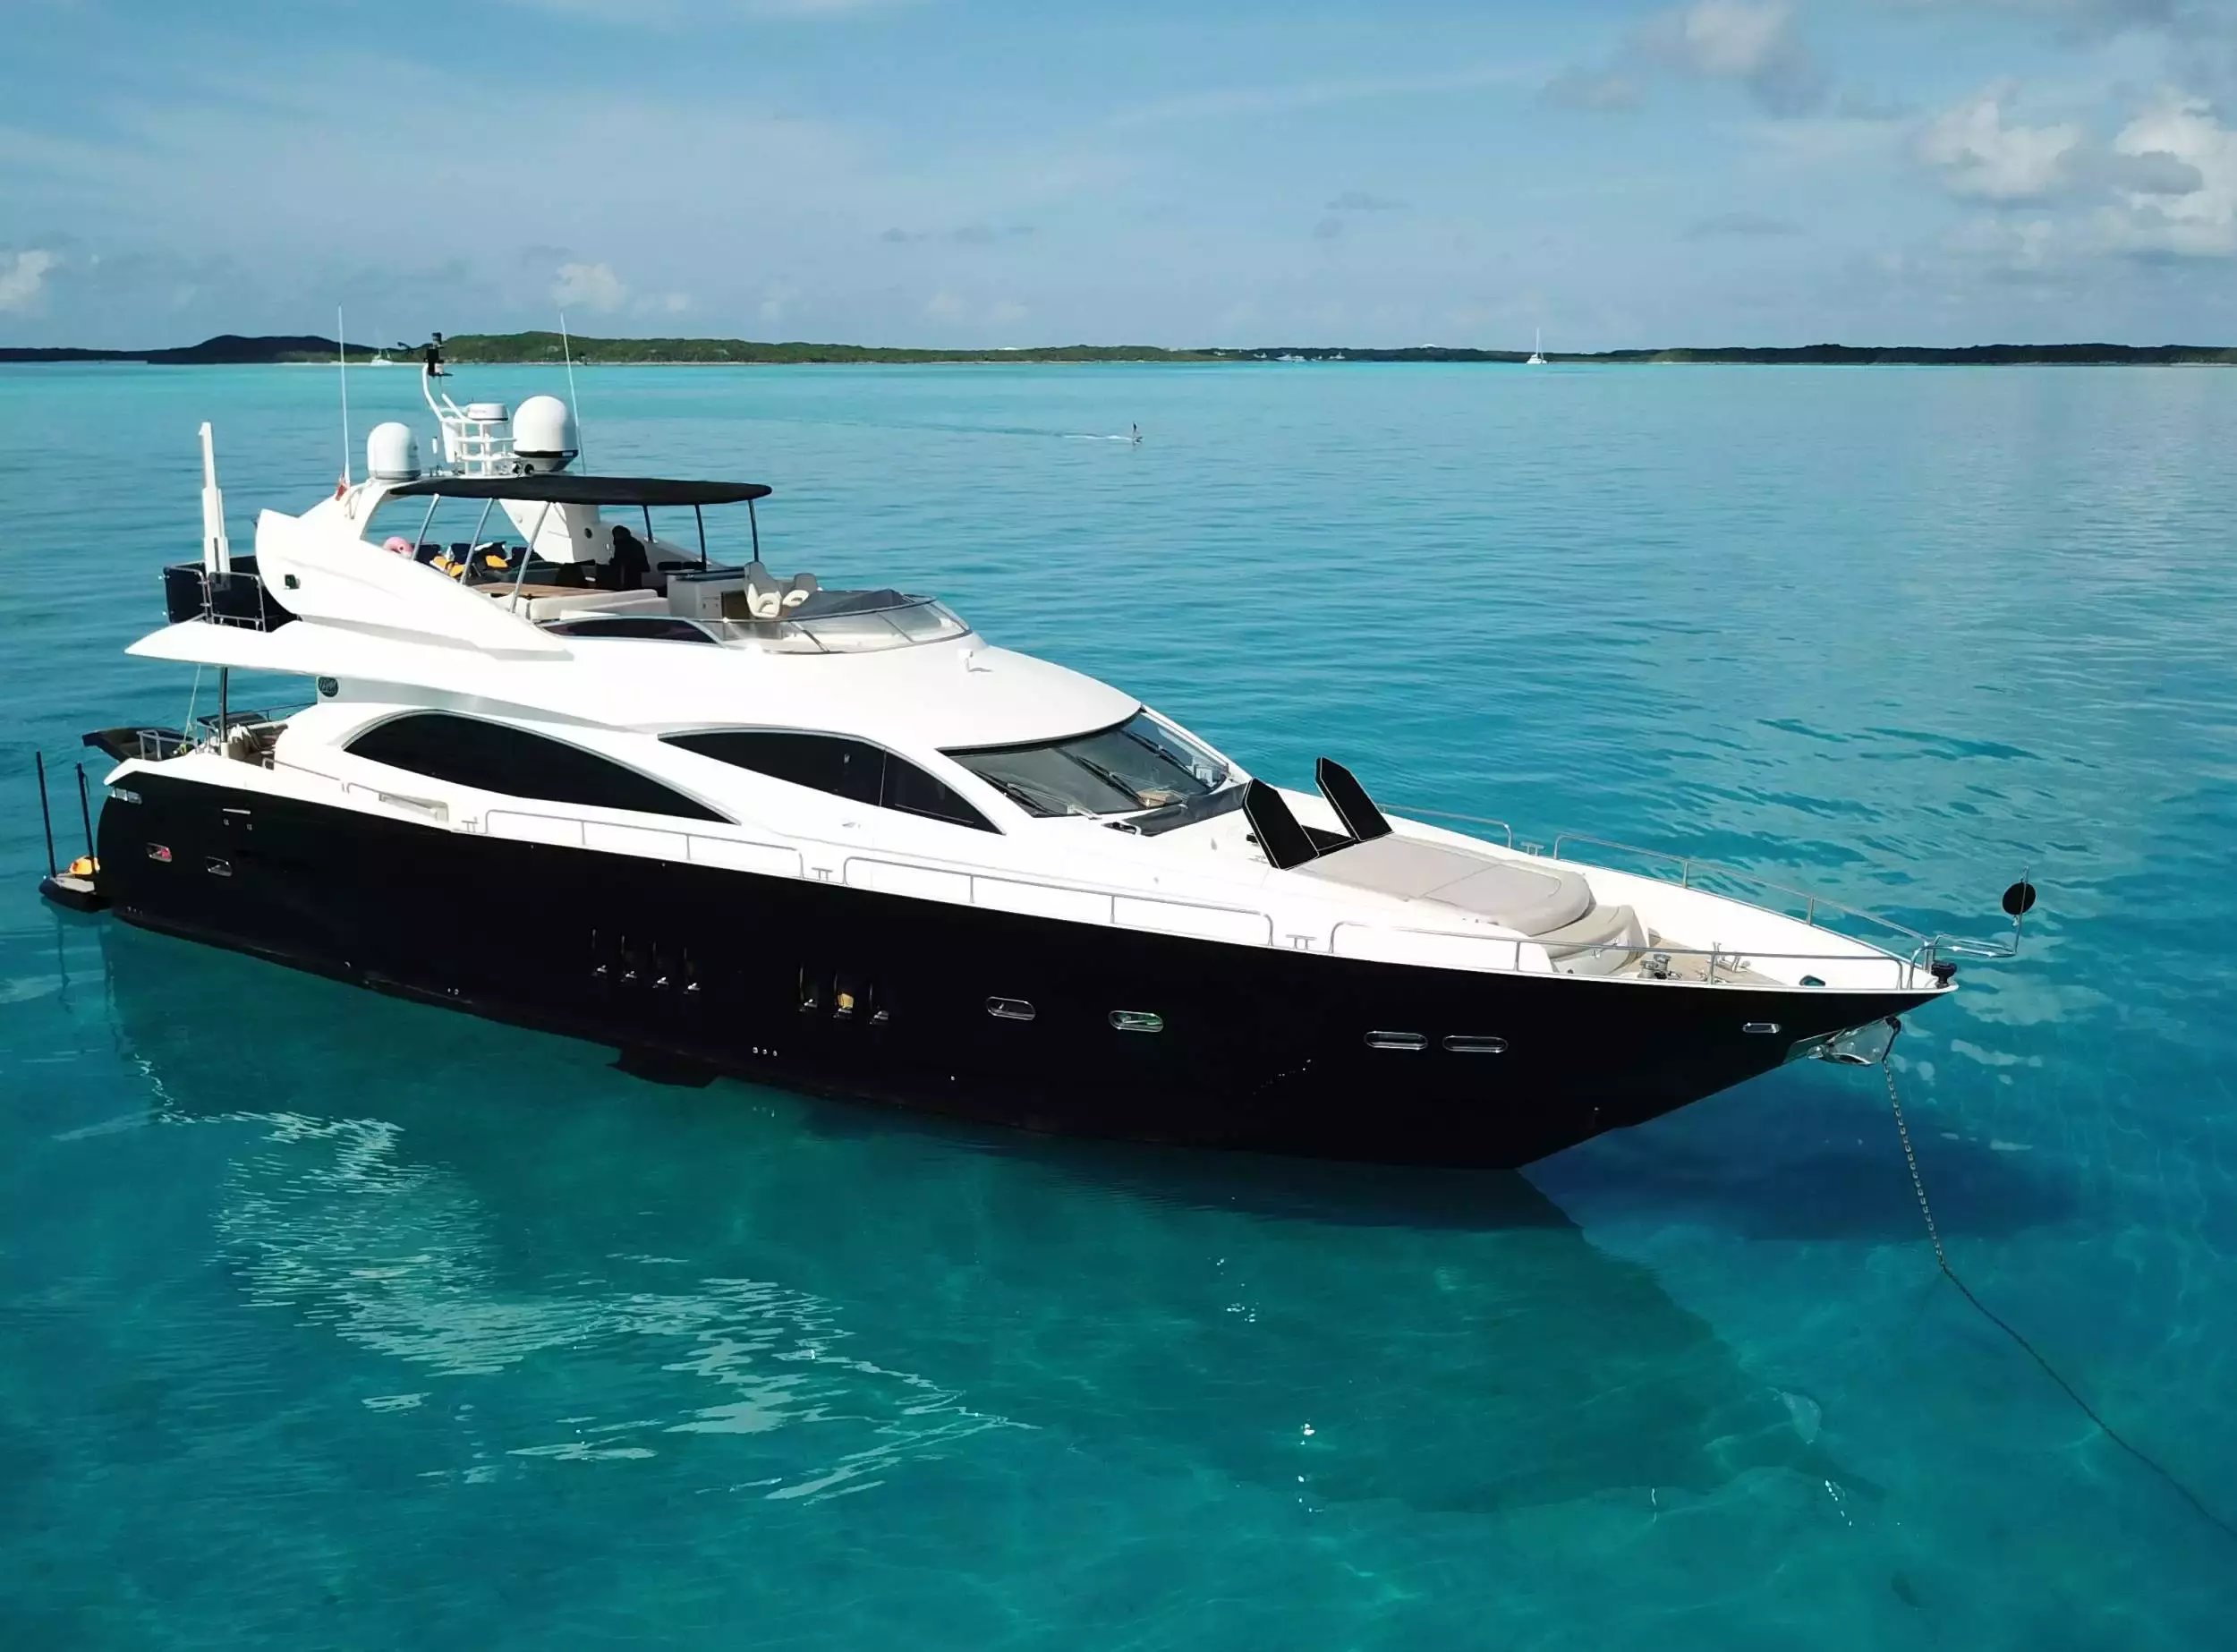 Catalana by Sunseeker - Special Offer for a private Motor Yacht Charter in Abacos with a crew